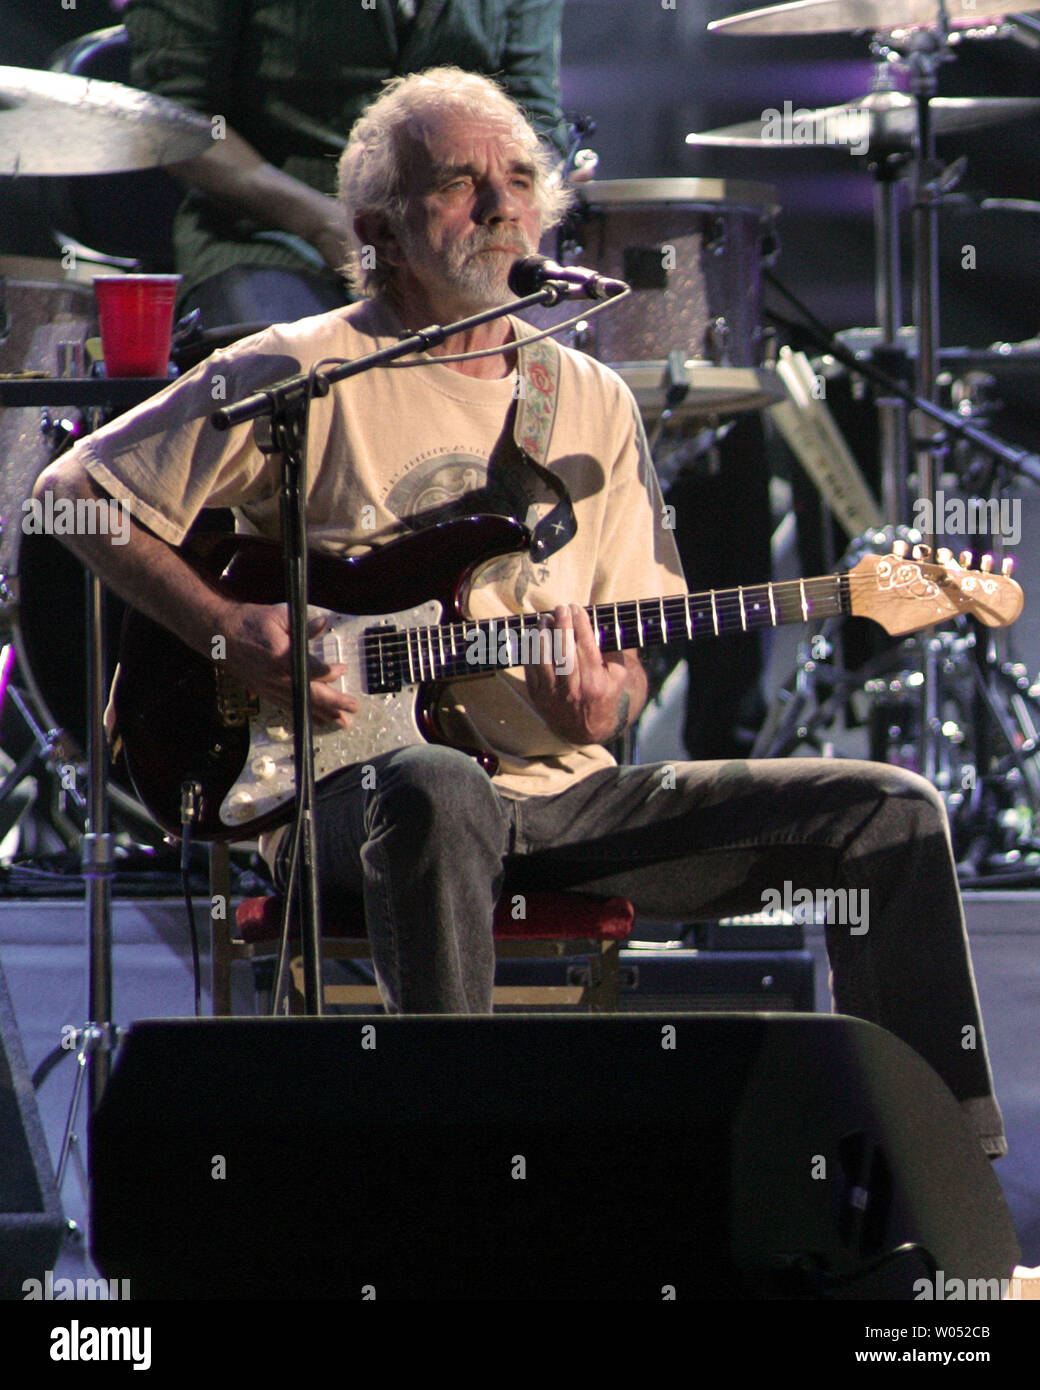 J.J. Cale performs in concert with Eric Clapton at the ipayOne Center in San Diego on March 15, 2007.   (UPI Photo/Roger Williams) Stock Photo